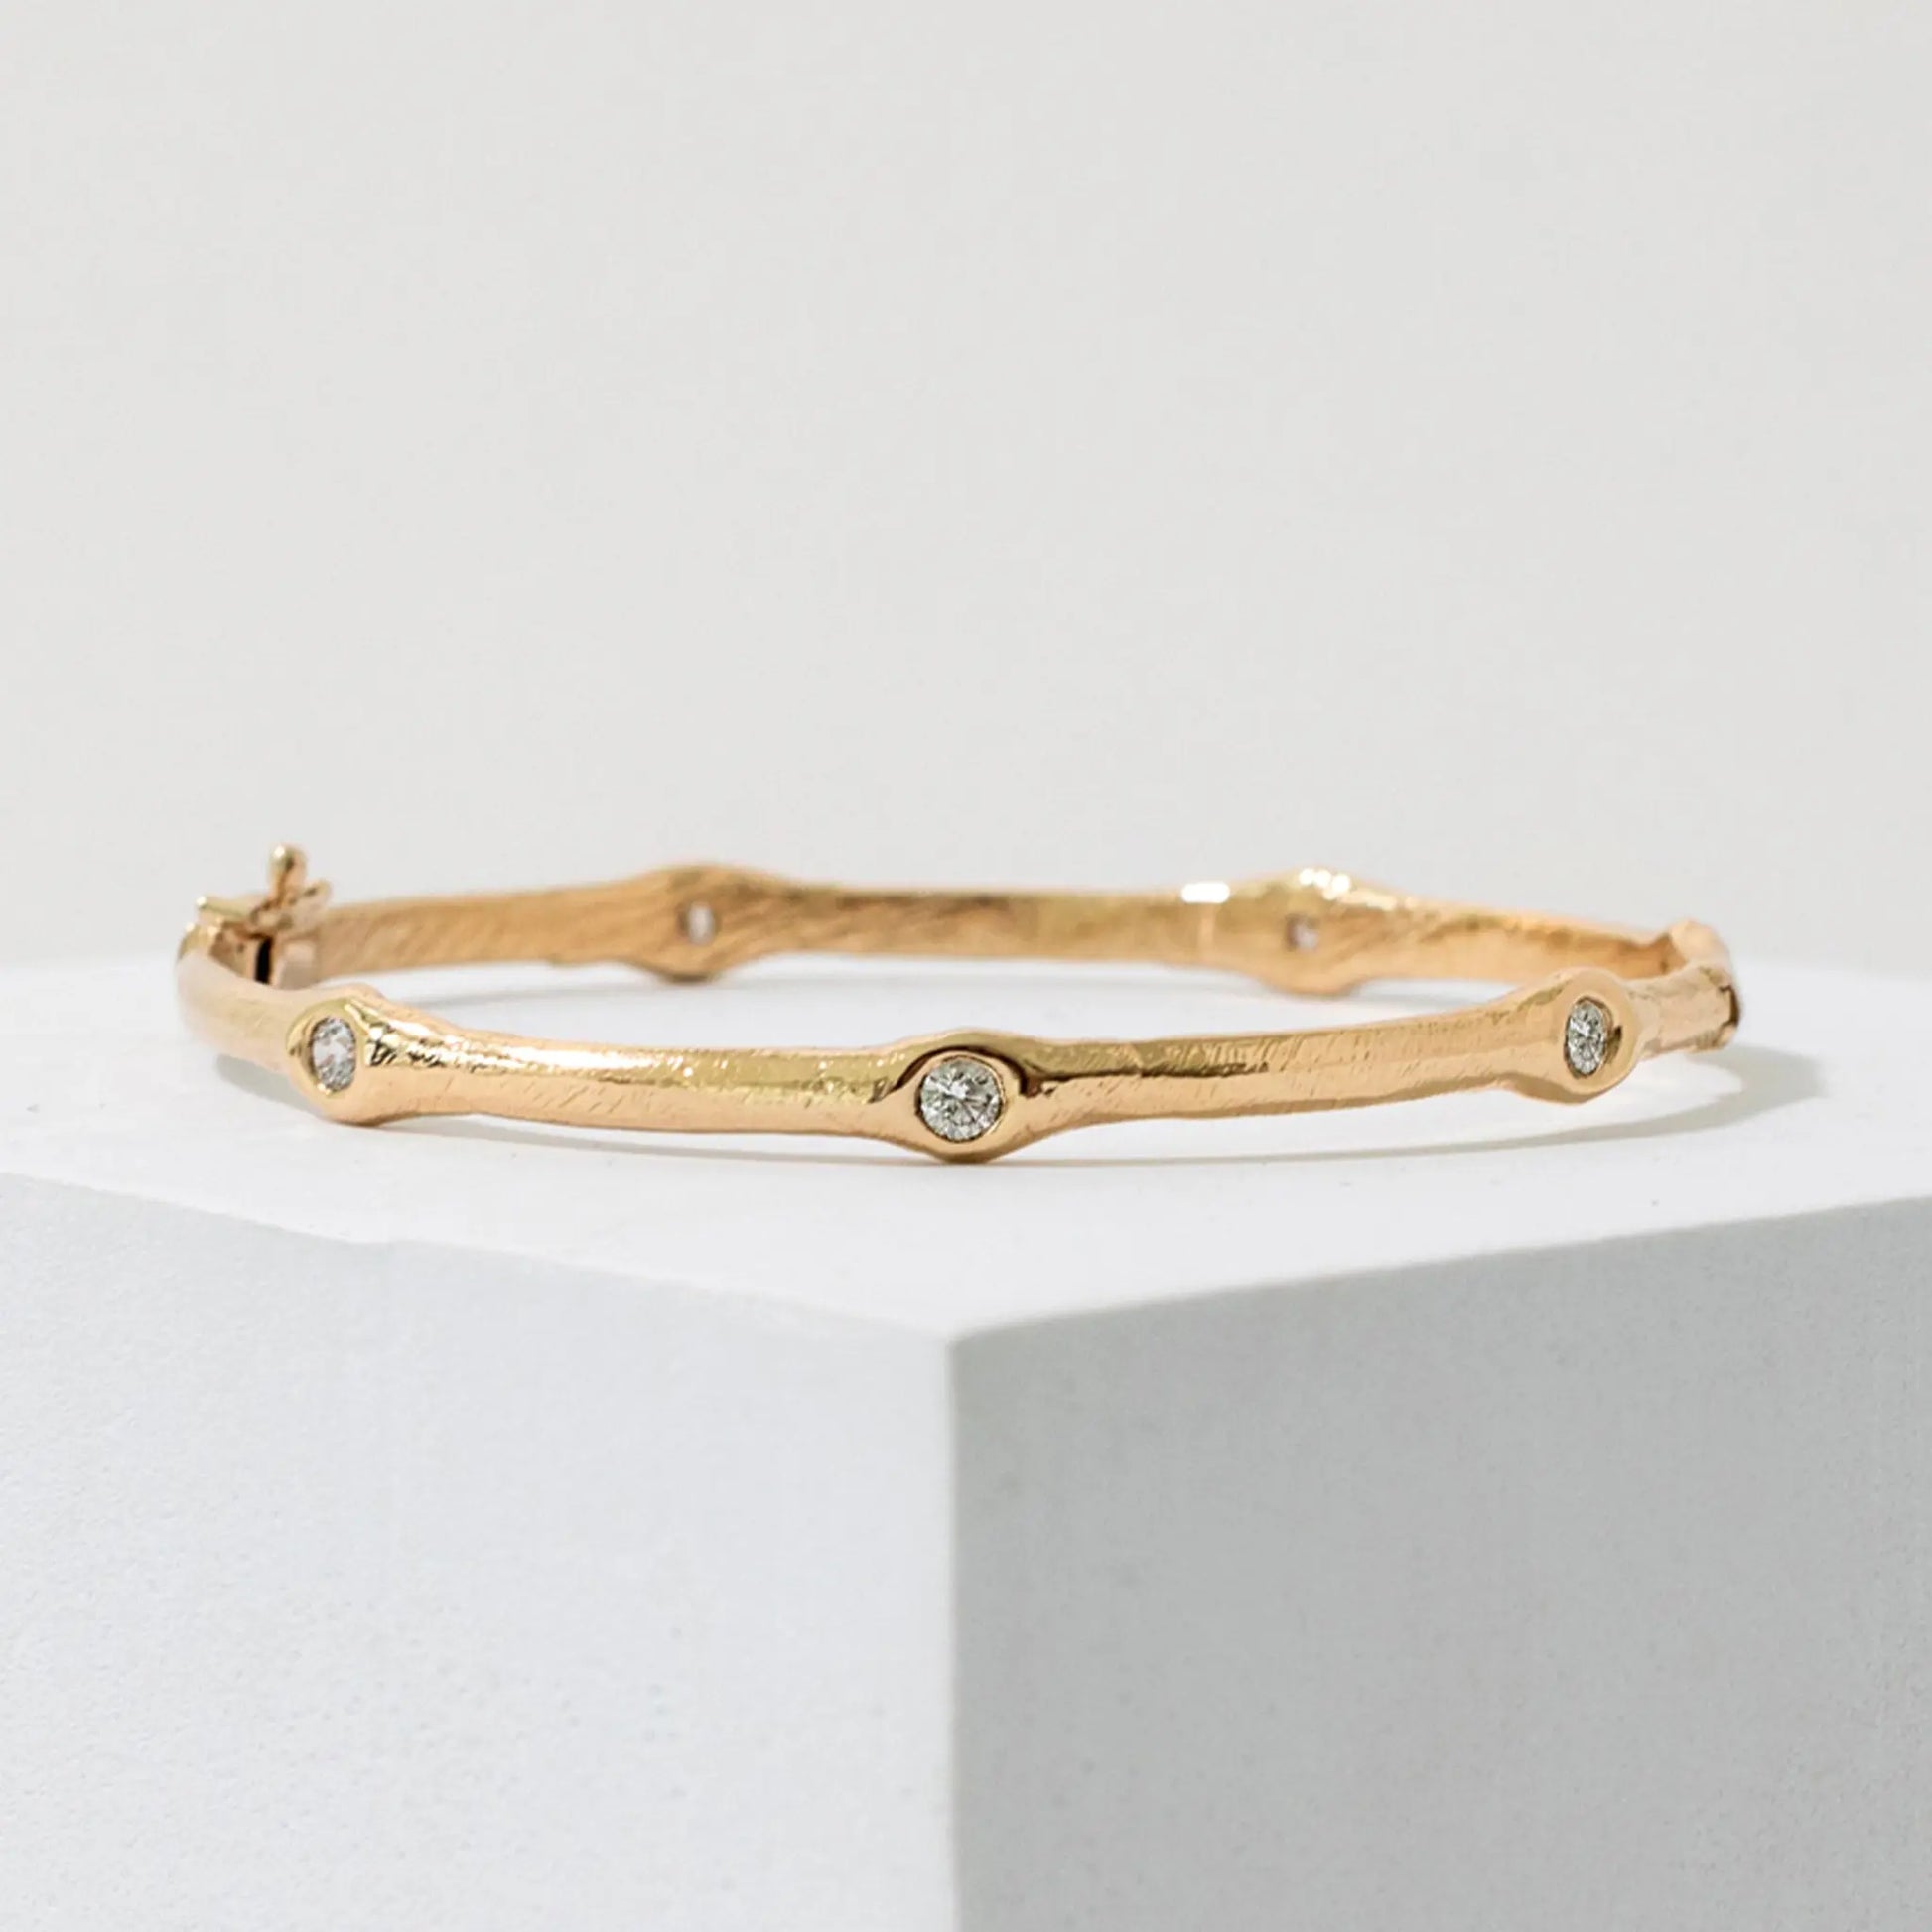 Spaced Eternity Bangle Mary Frances Maker